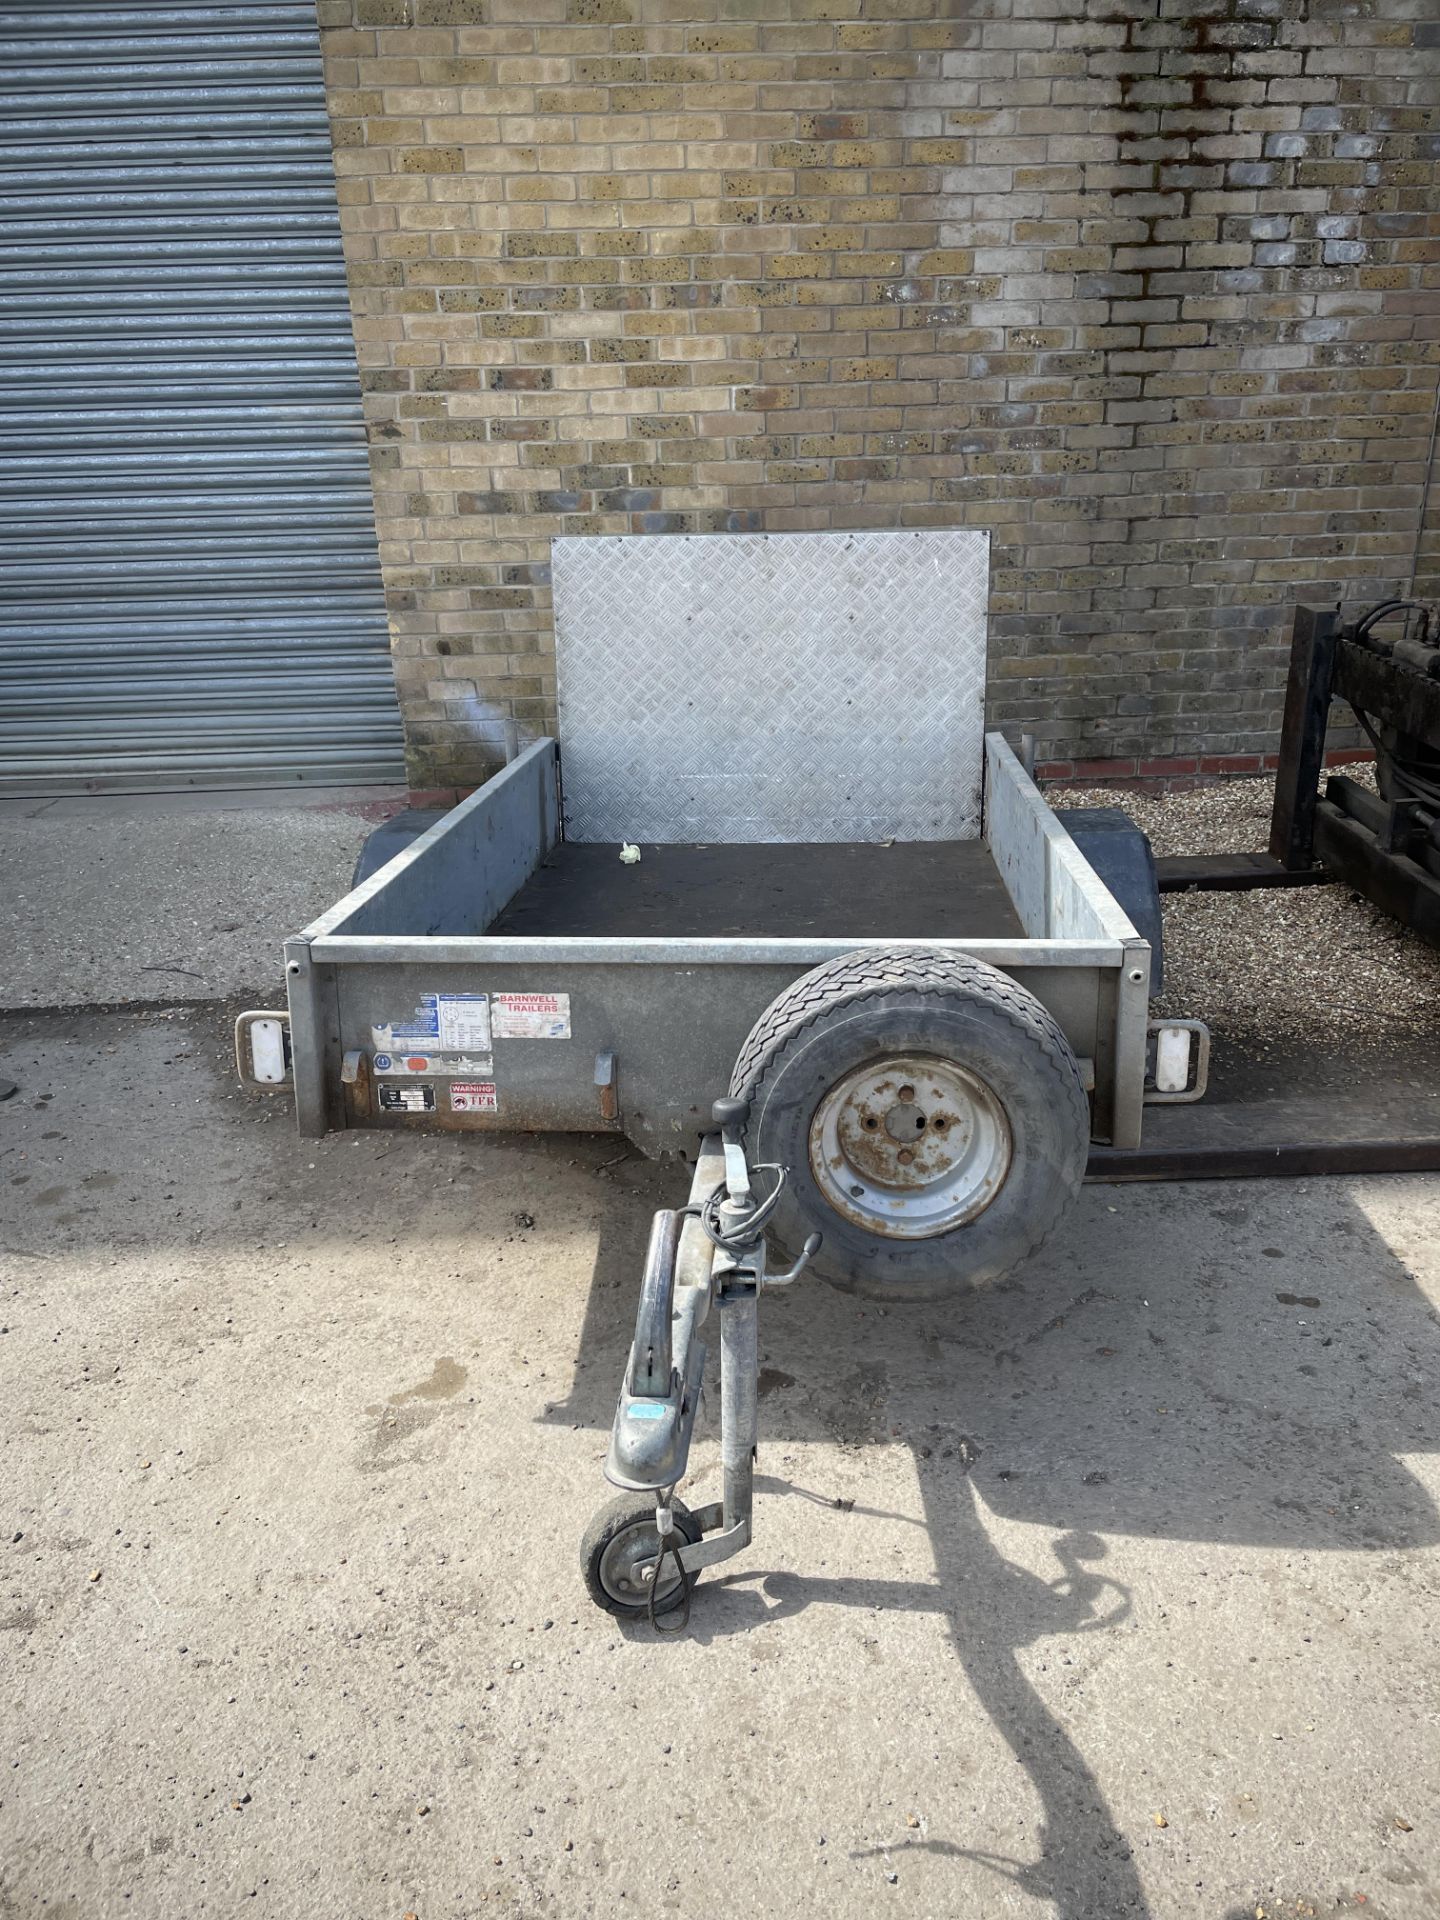 1: Ifor Williams P6e Approx 1.3m x 2.6m Single Axle Trailer Plate No. 752/7072 with 750kg Max Gross